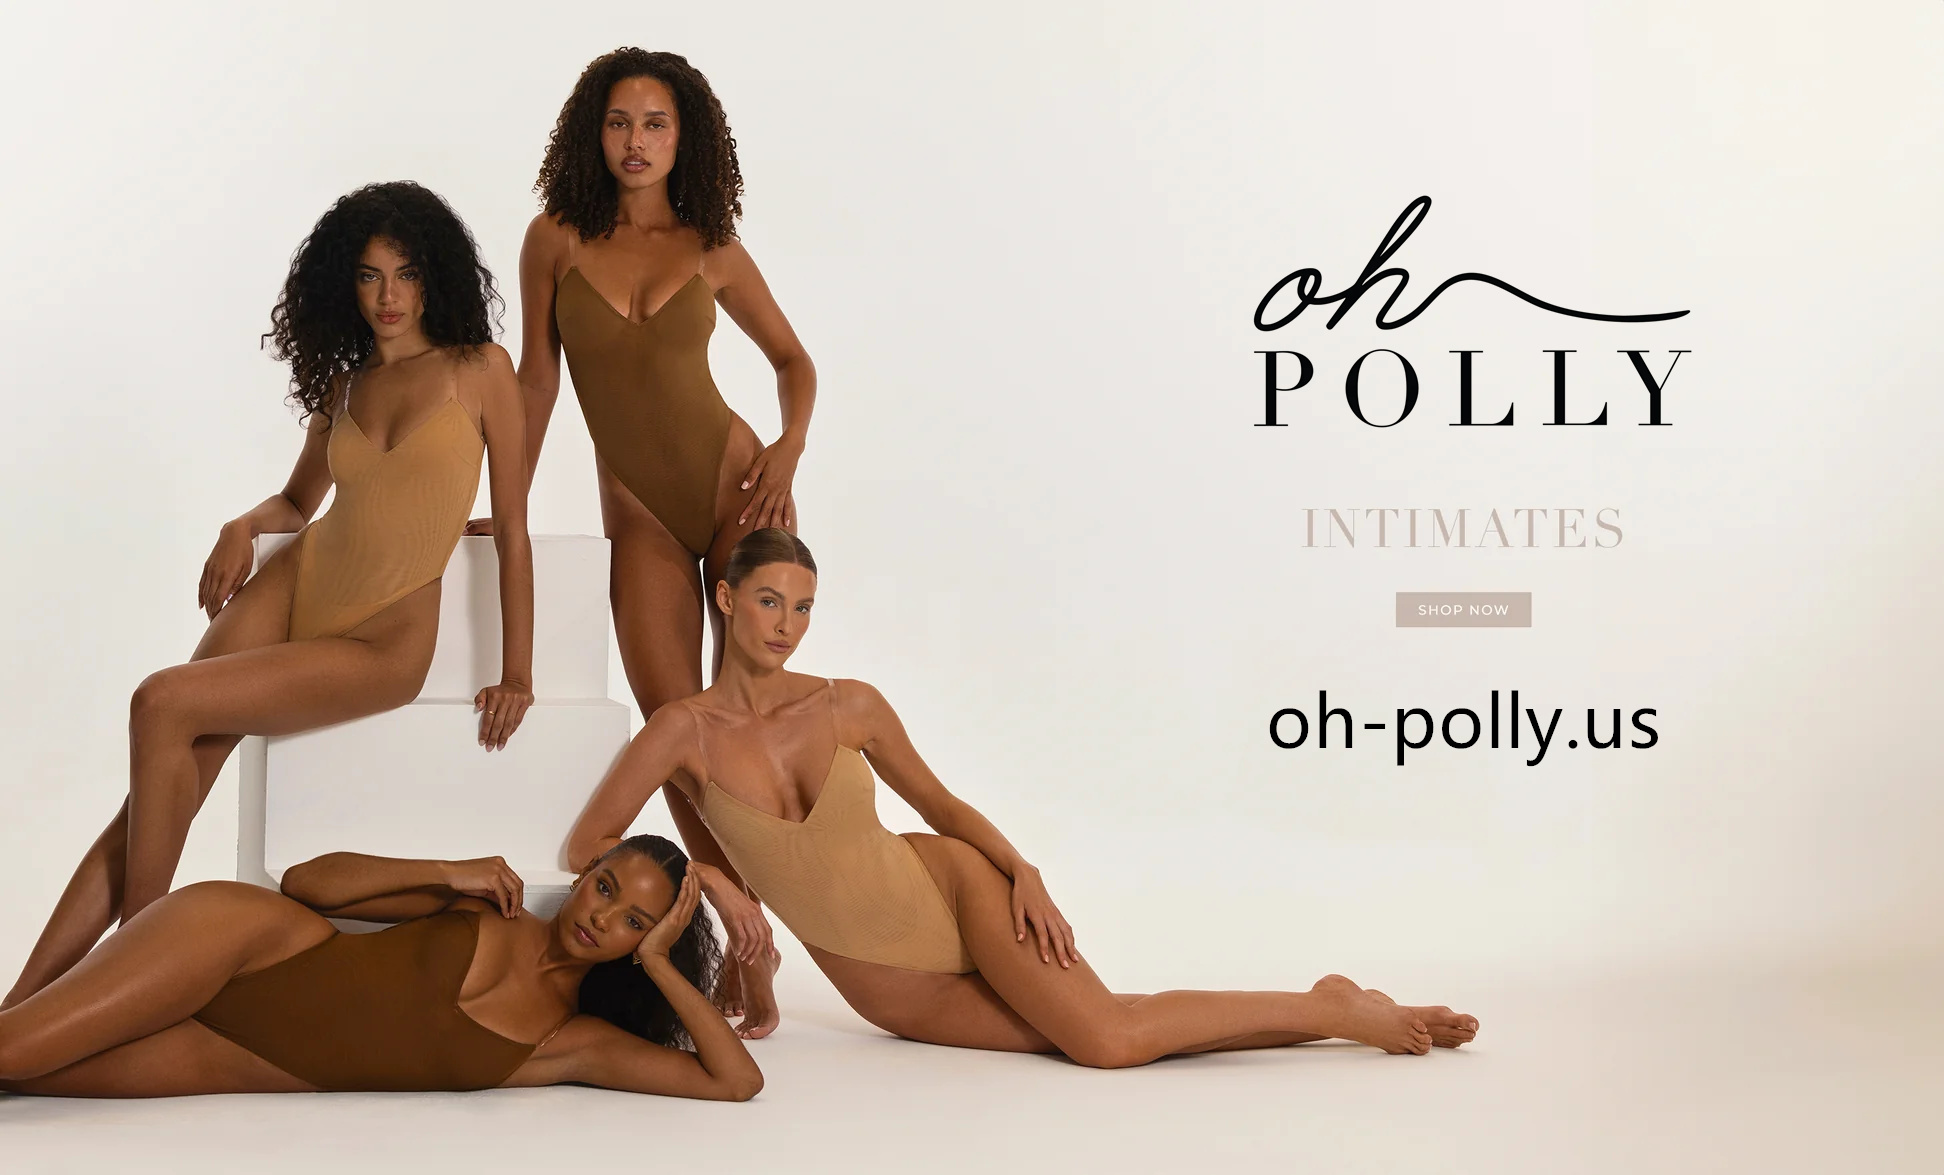 Oh Polly USA intimates will make your body more attractive